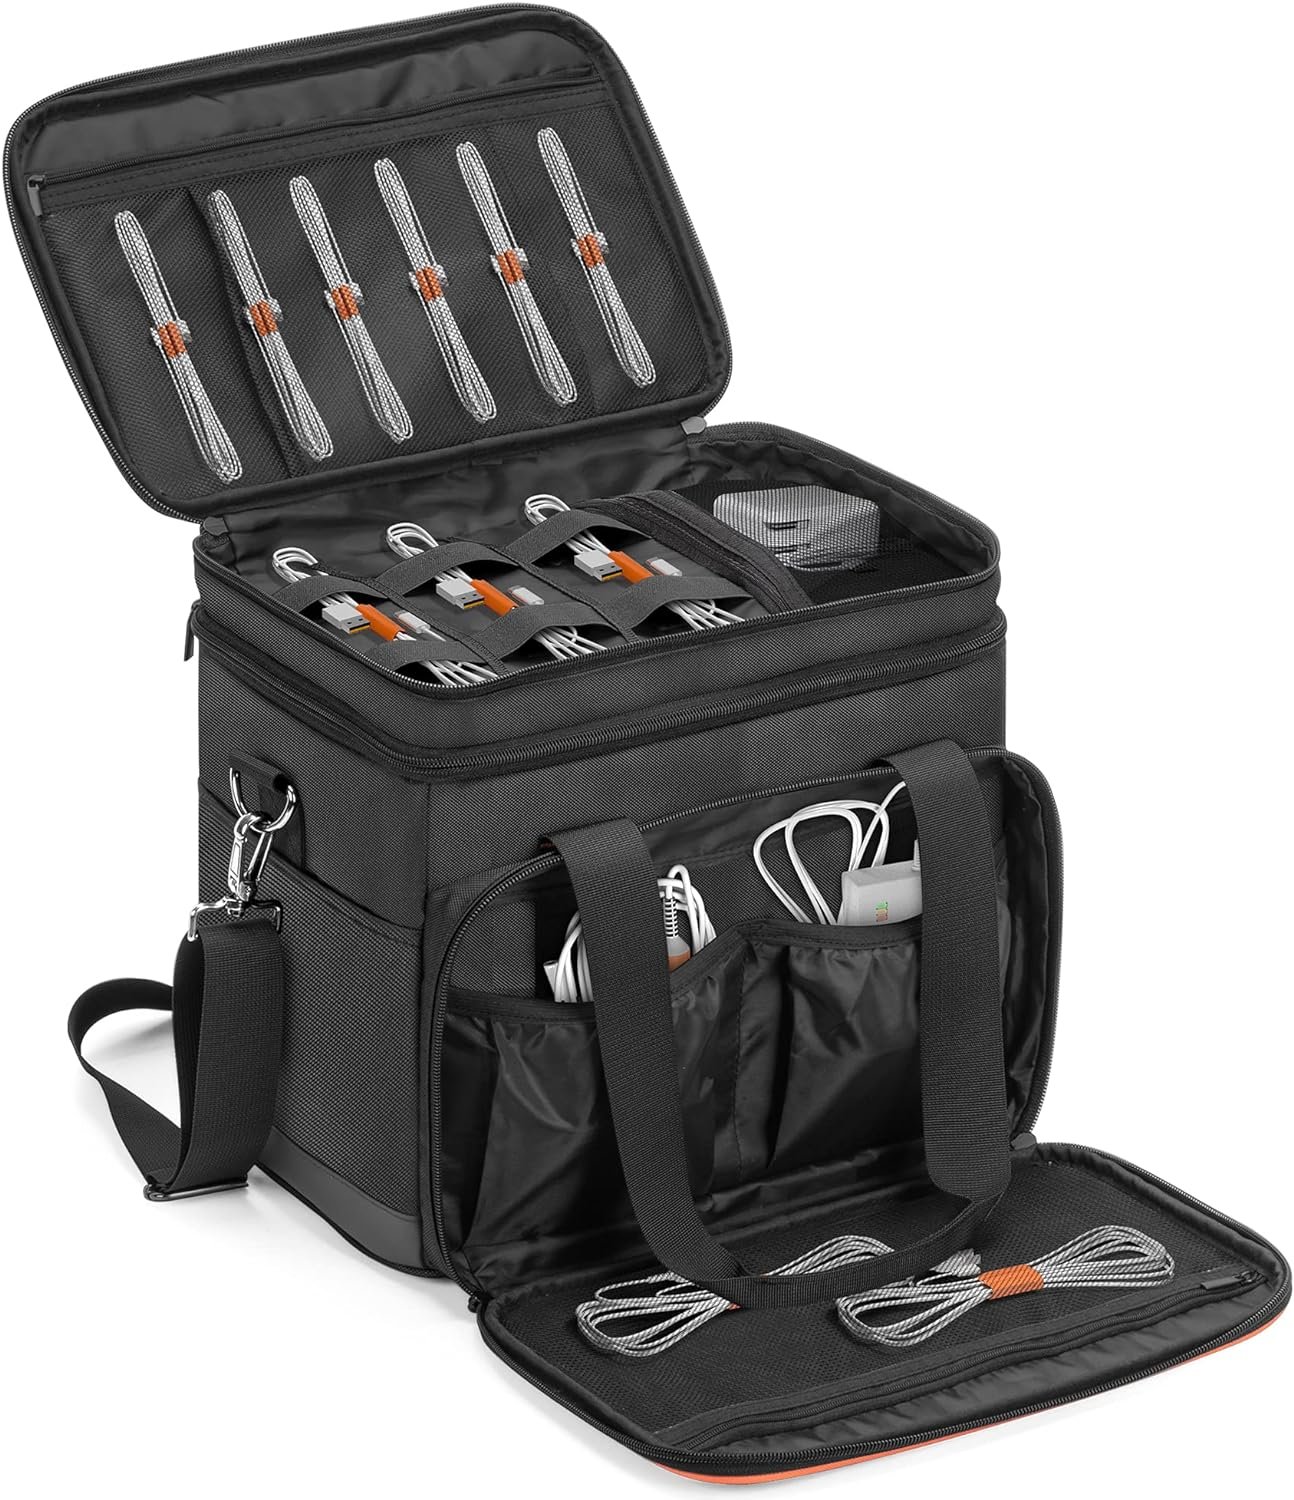 Trunab Double-Layer Carrying Case Review